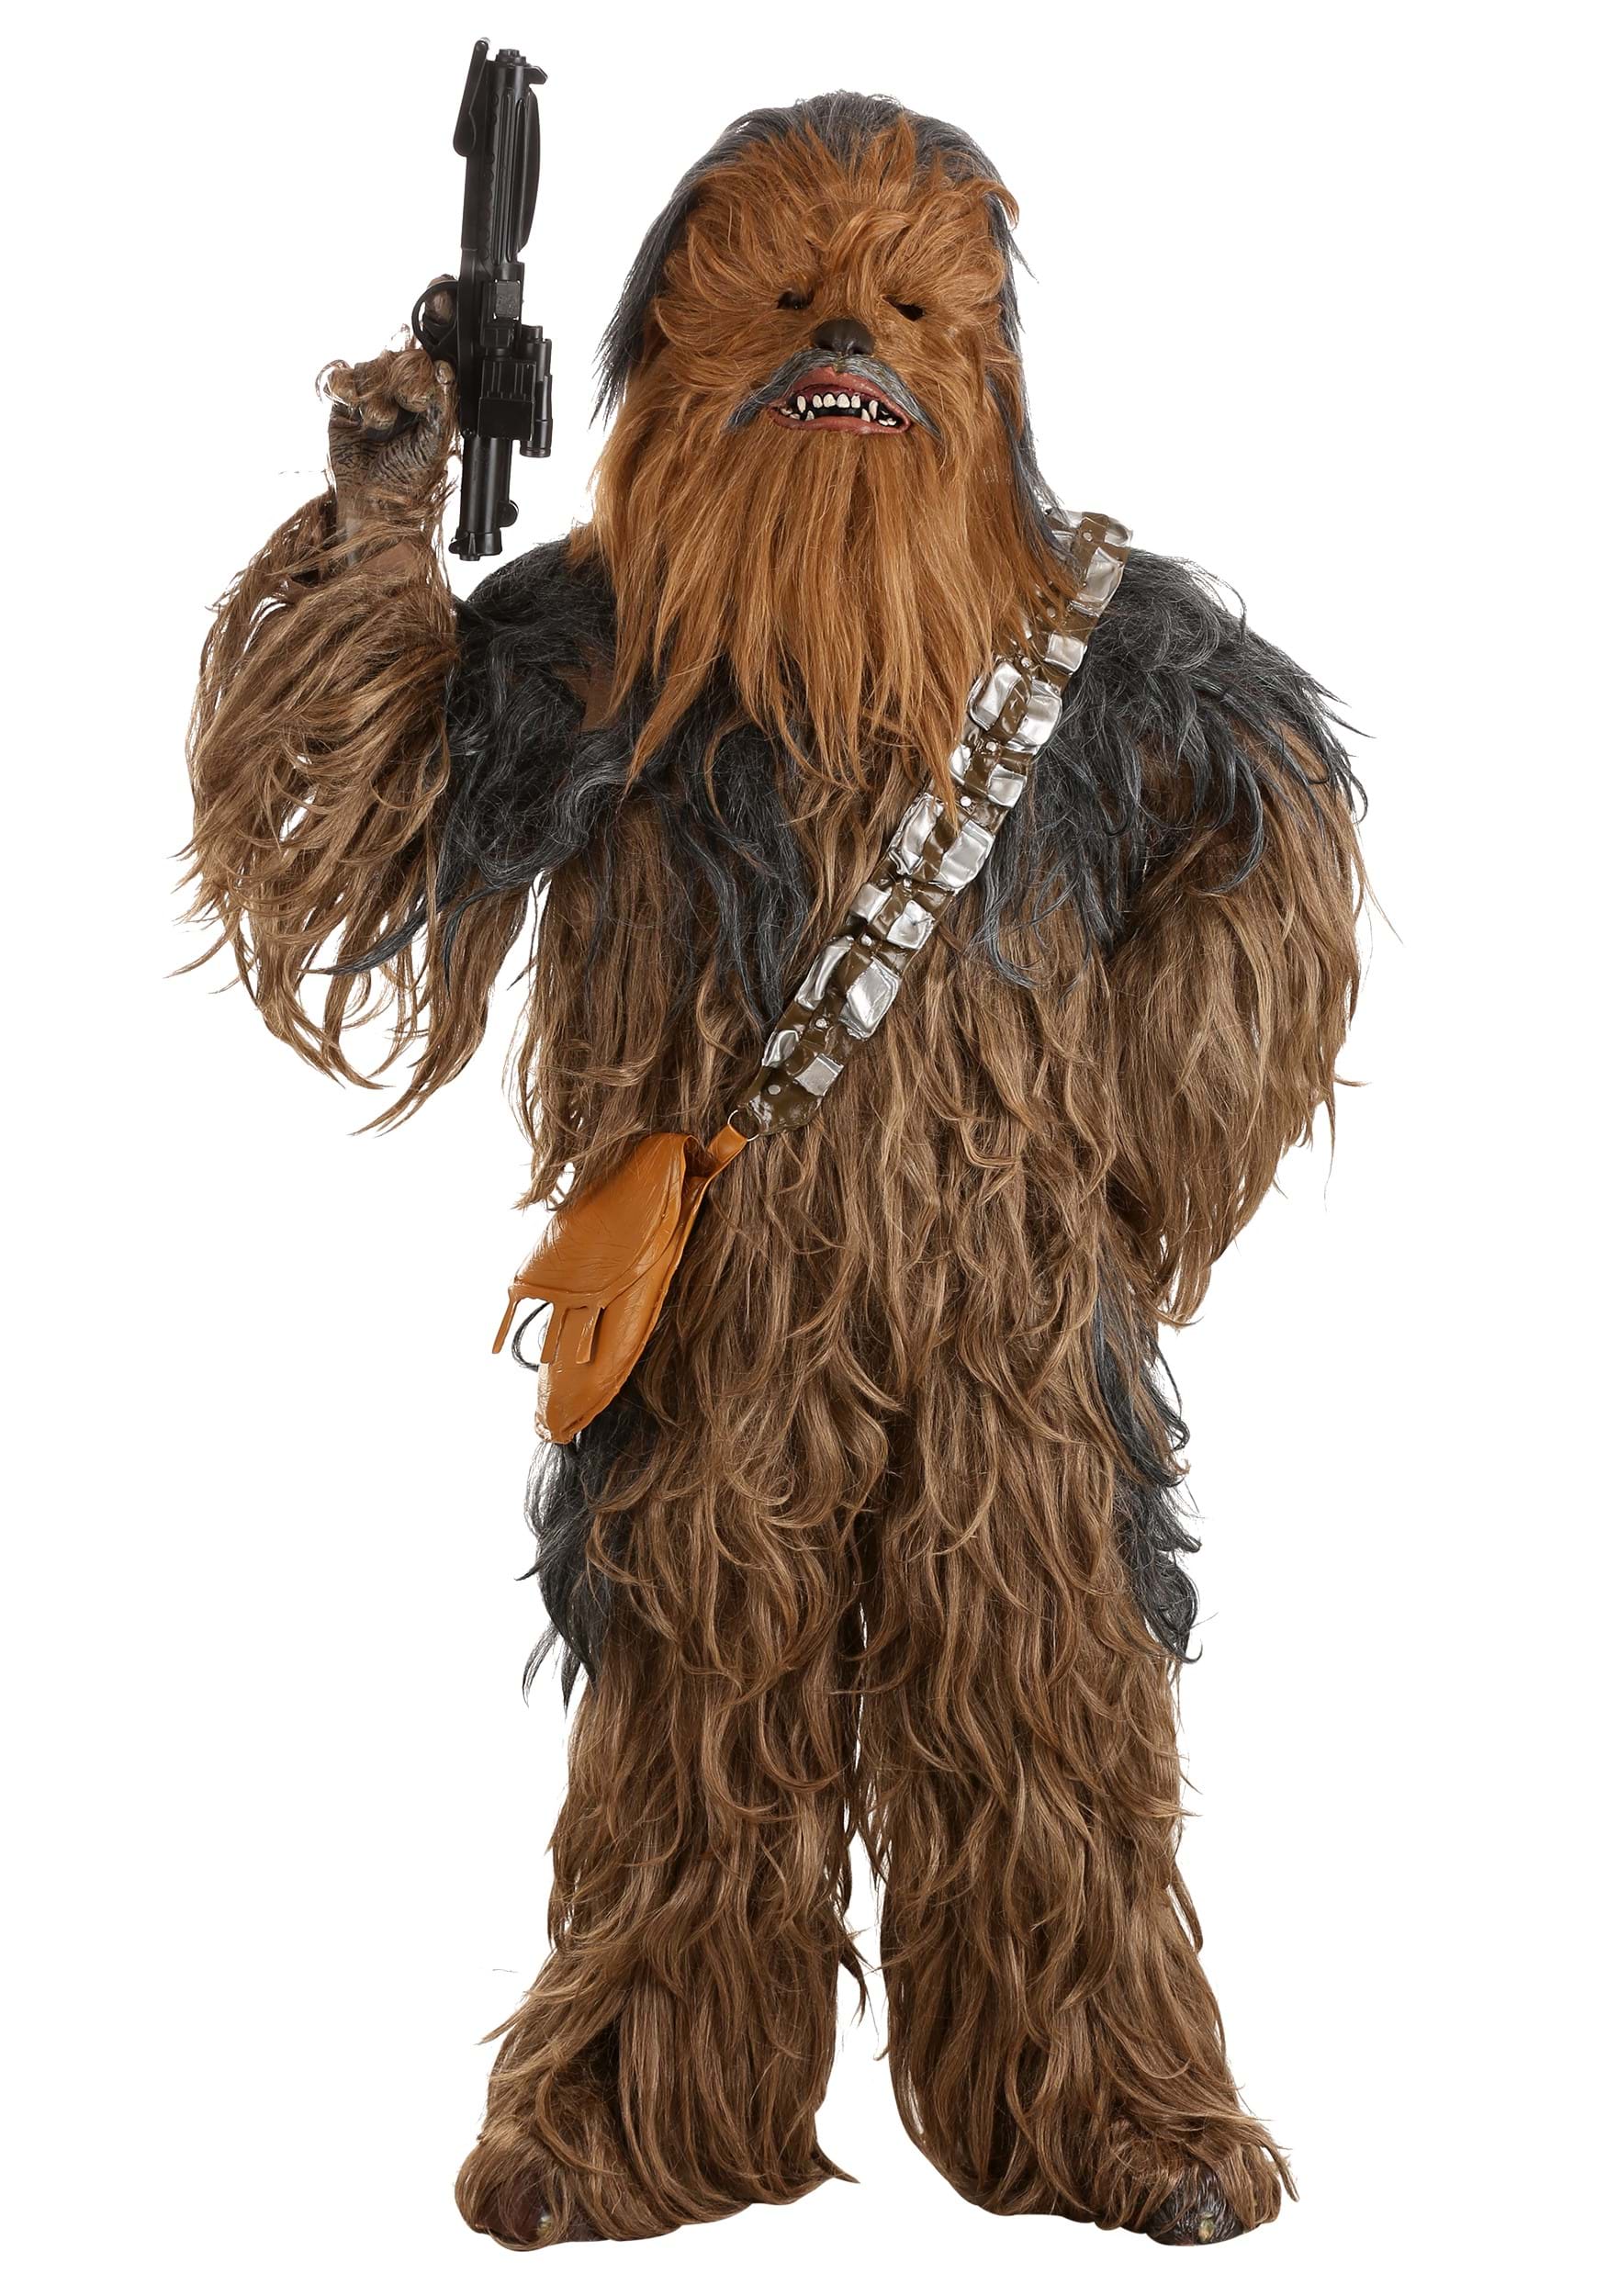 alex kochan recommends Pictures Of Chewbacca